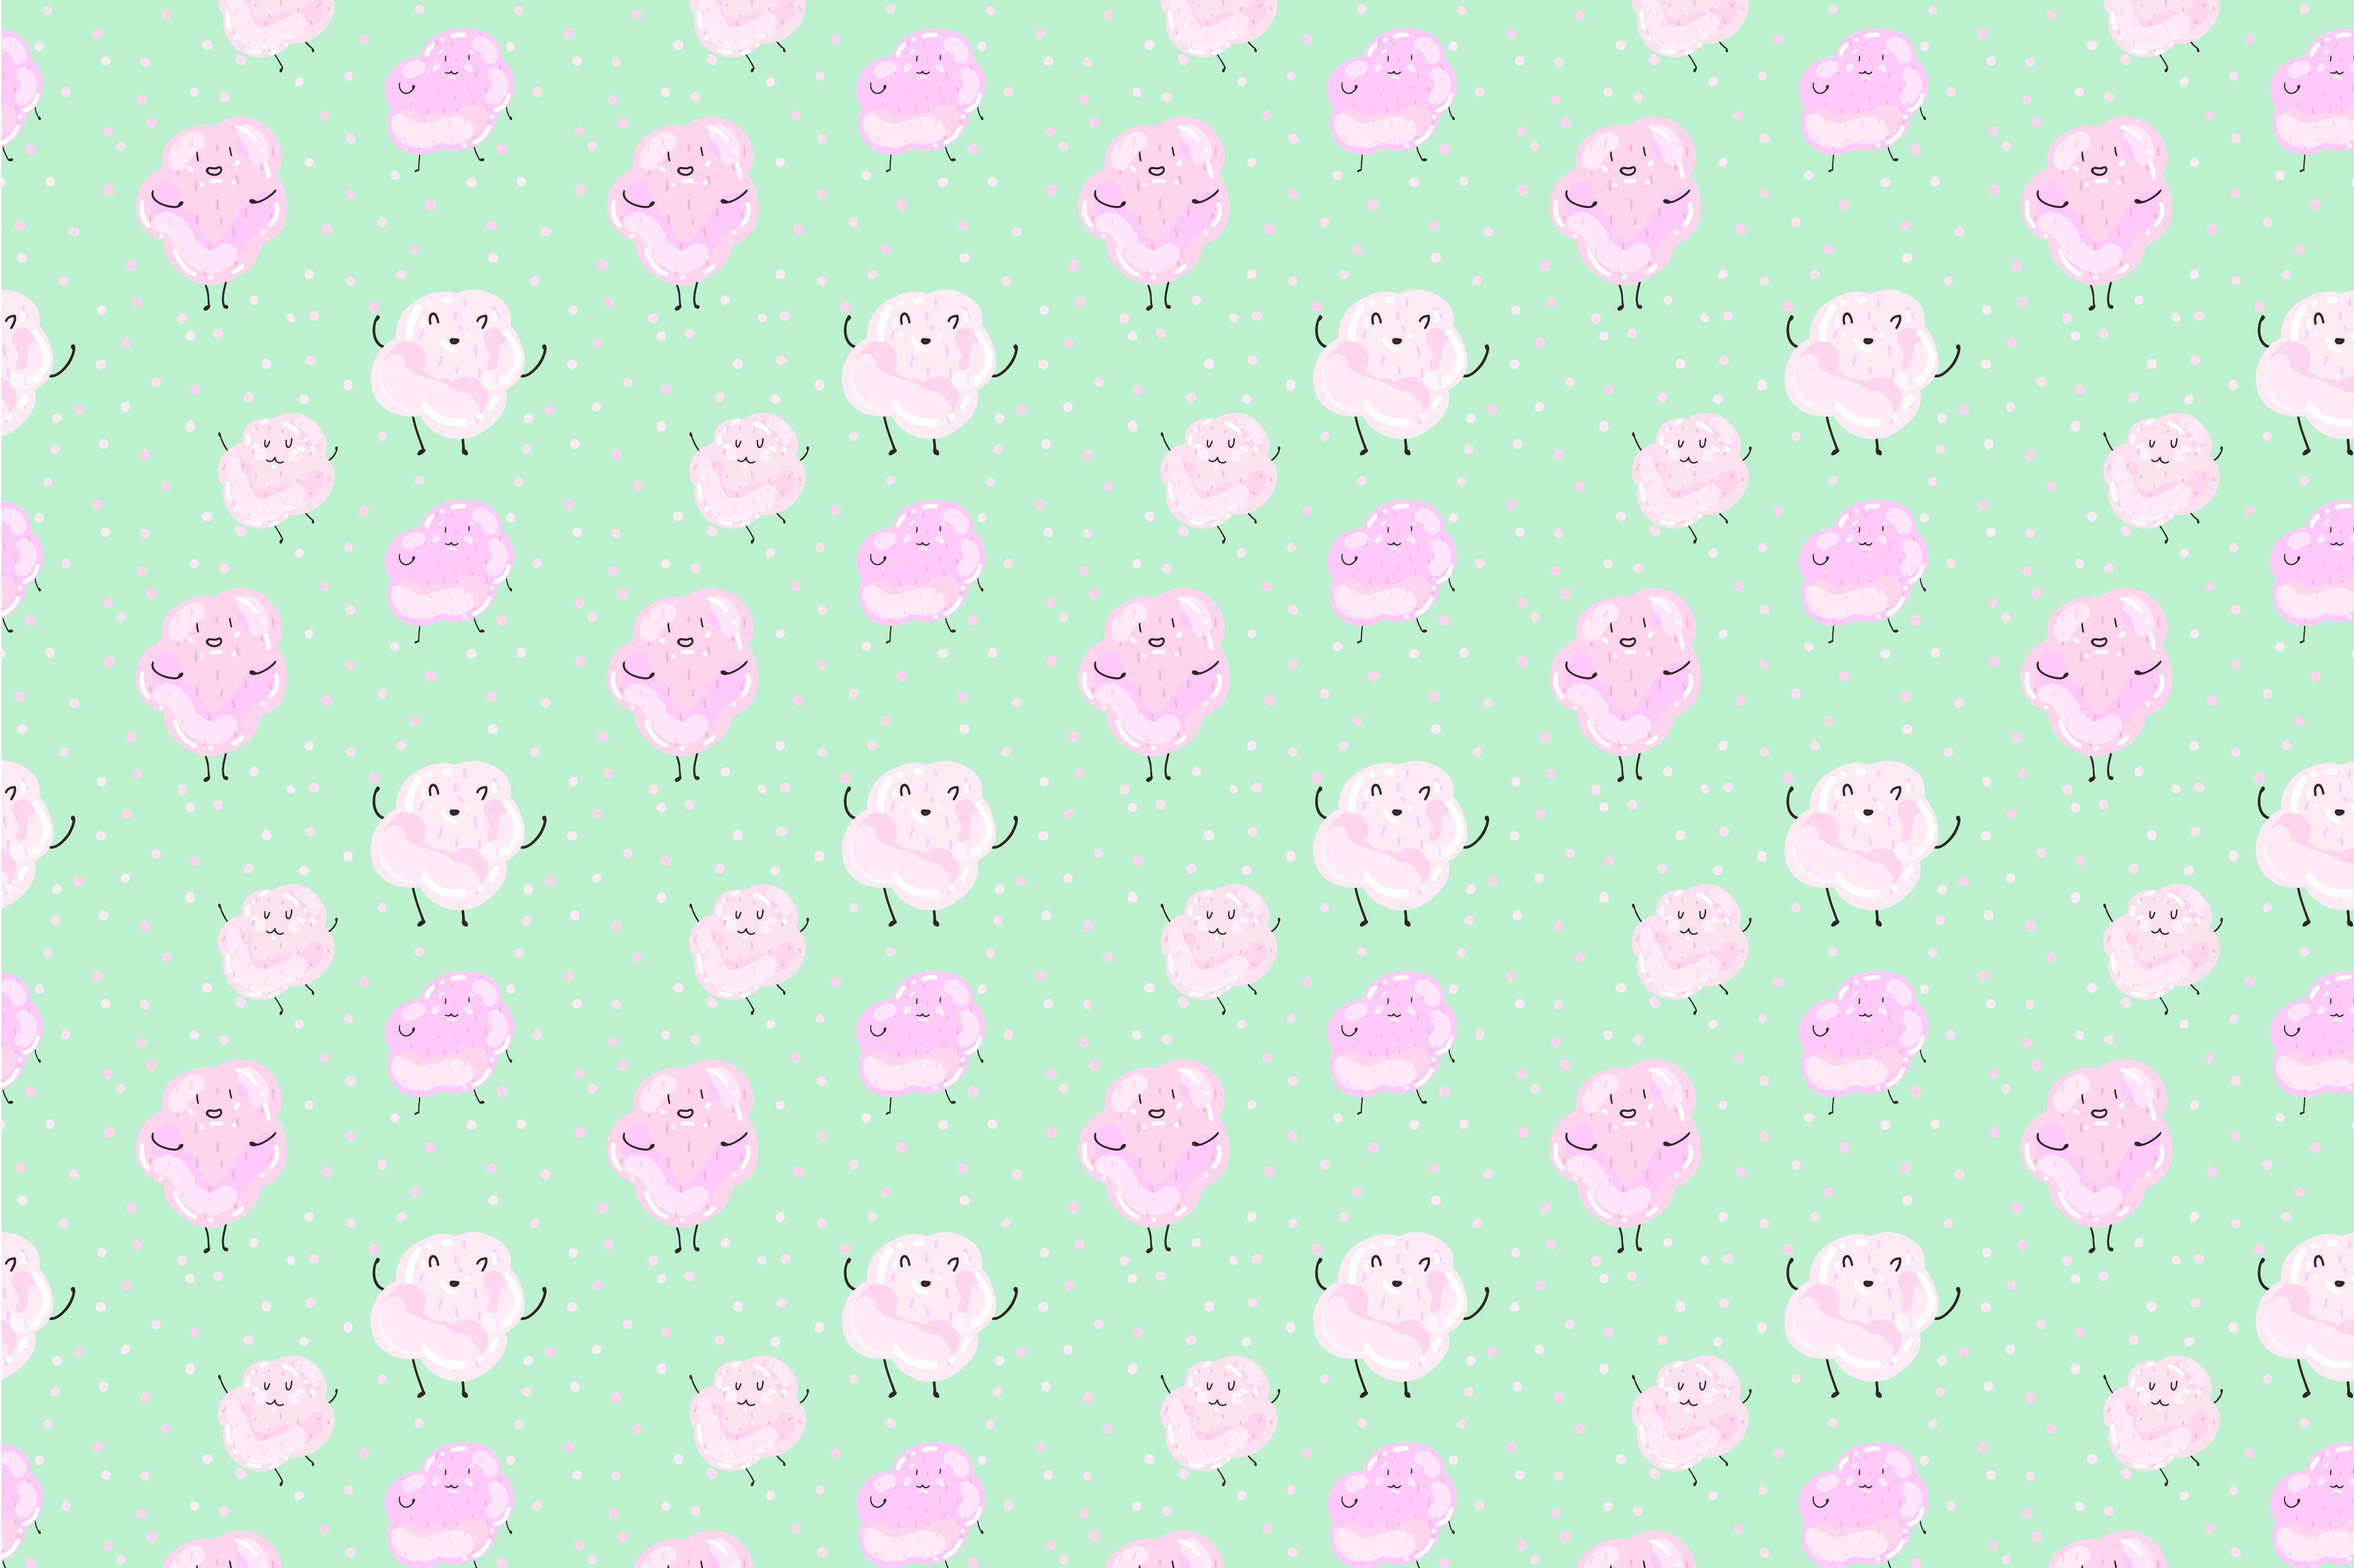 Cute marshmallows preview image.